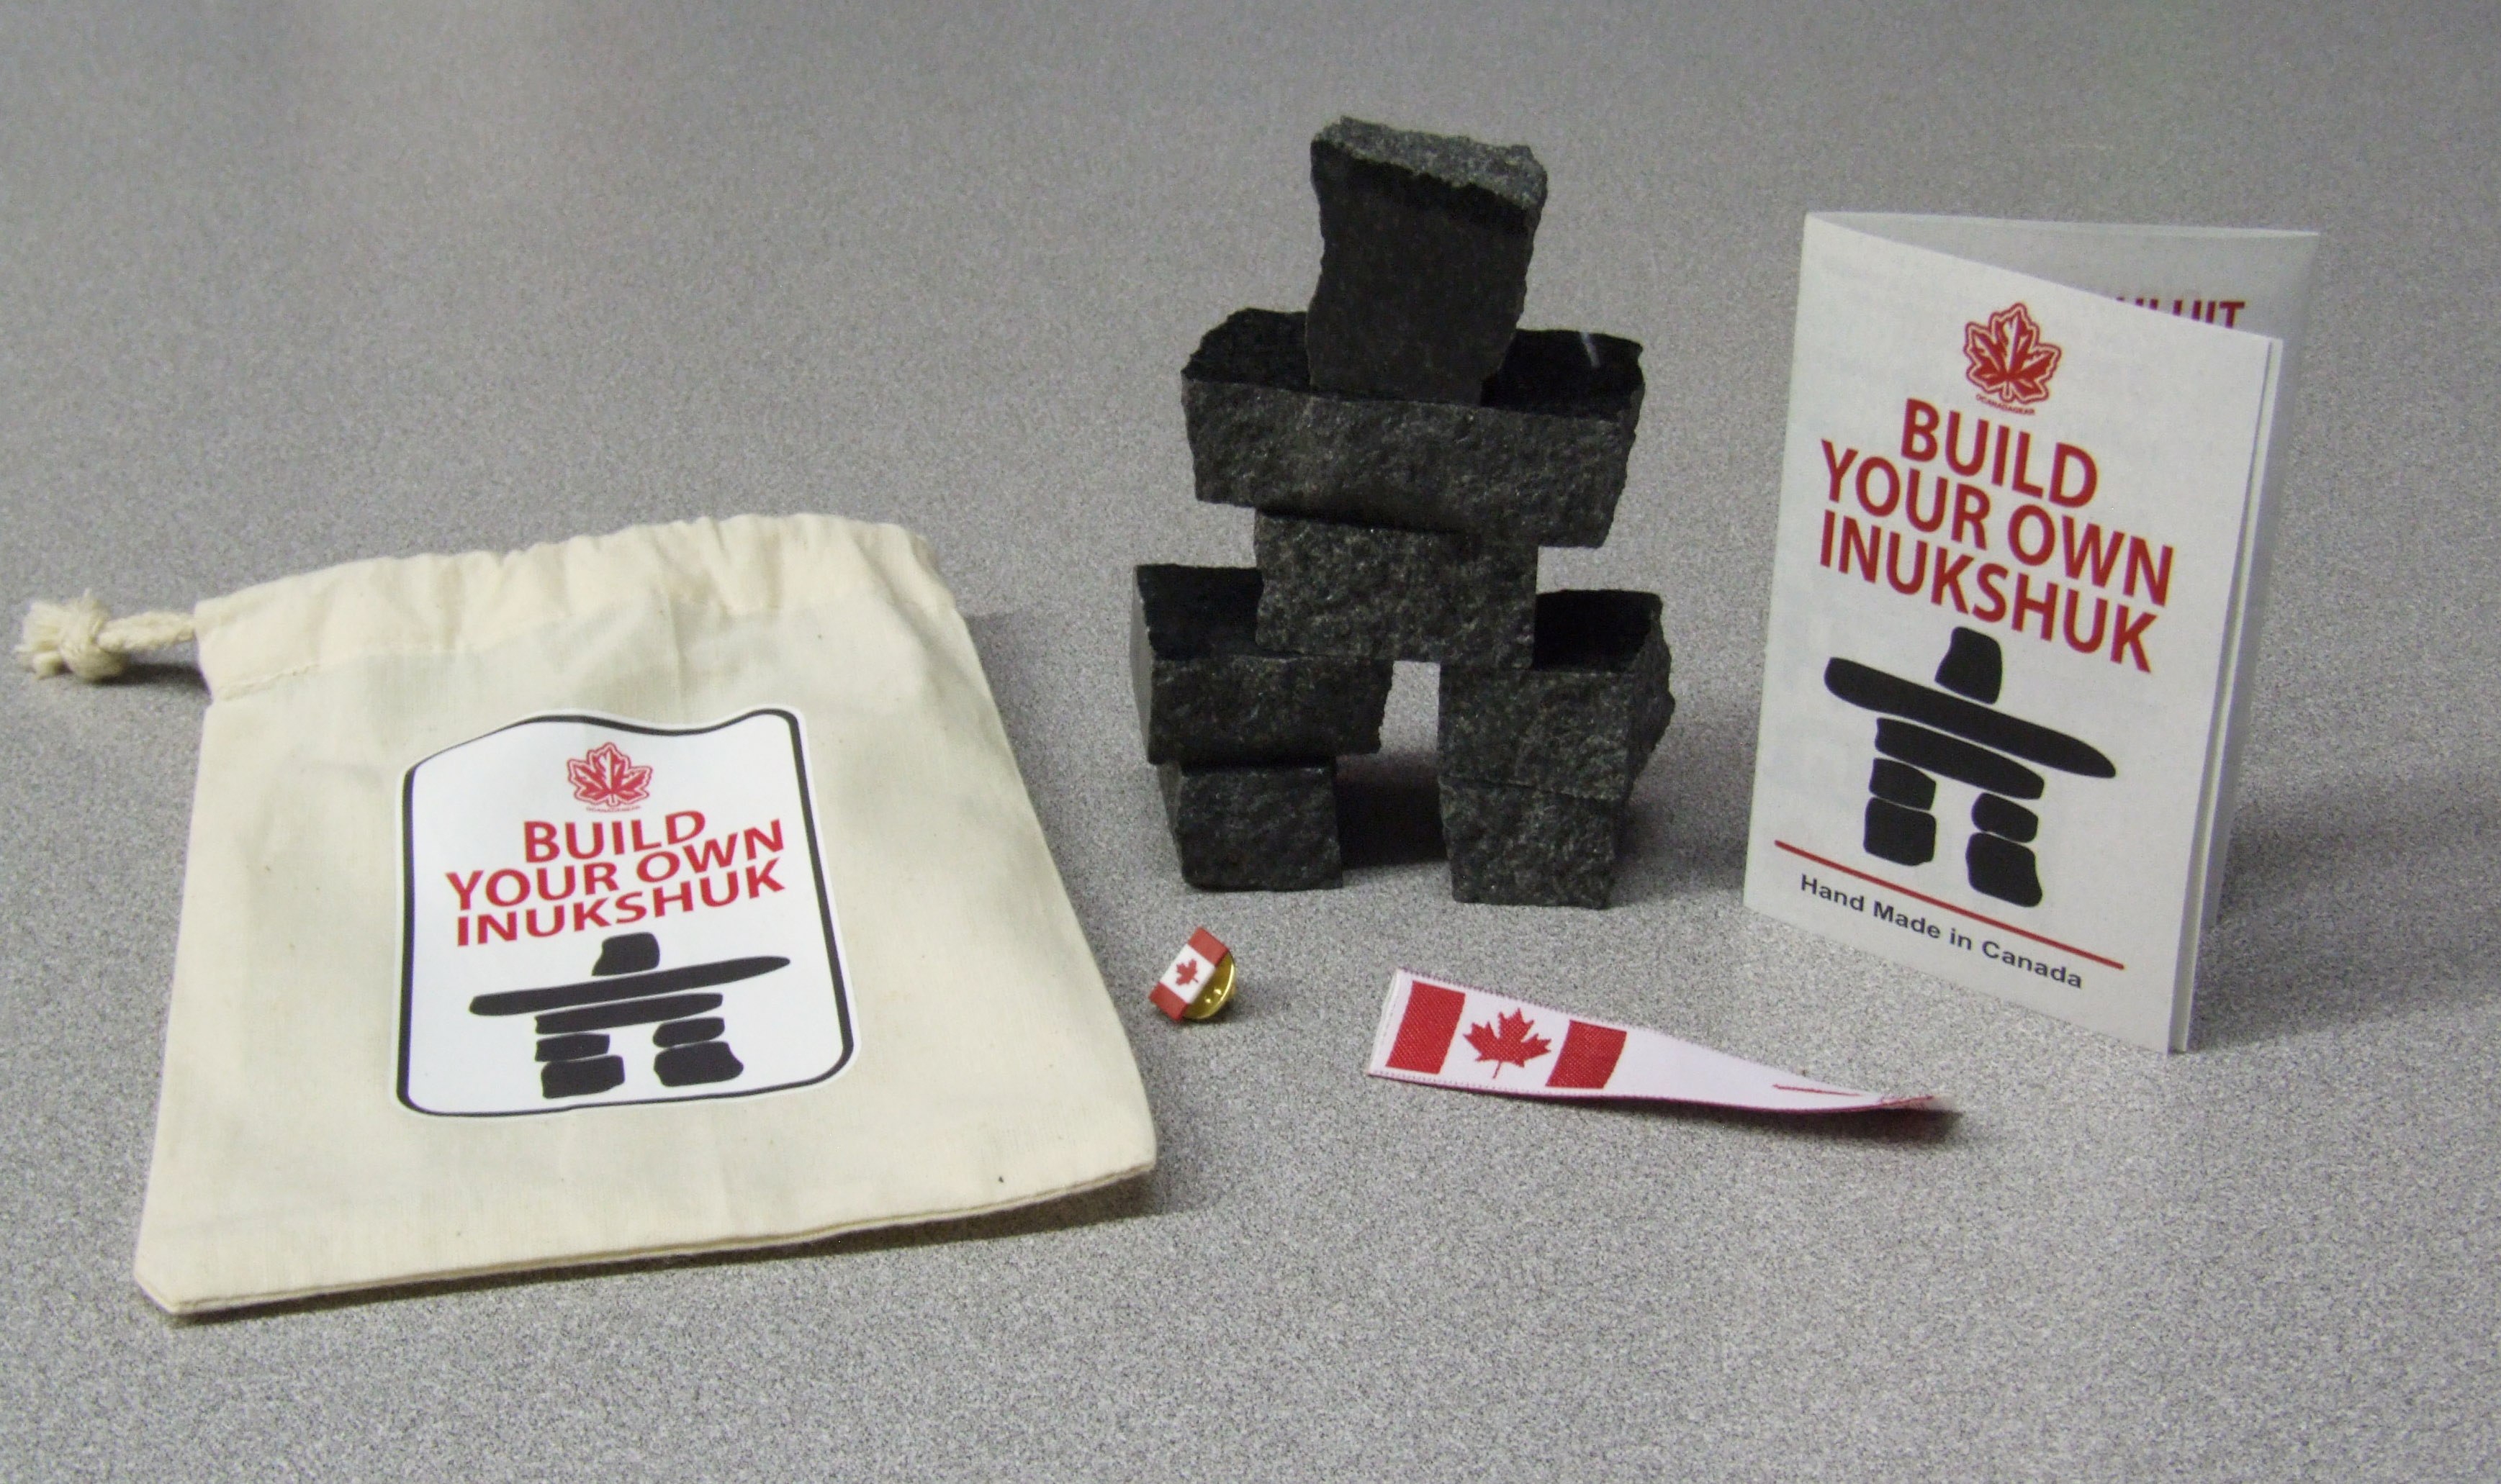 Build your own Inukshuks…your choice of 3 sizes